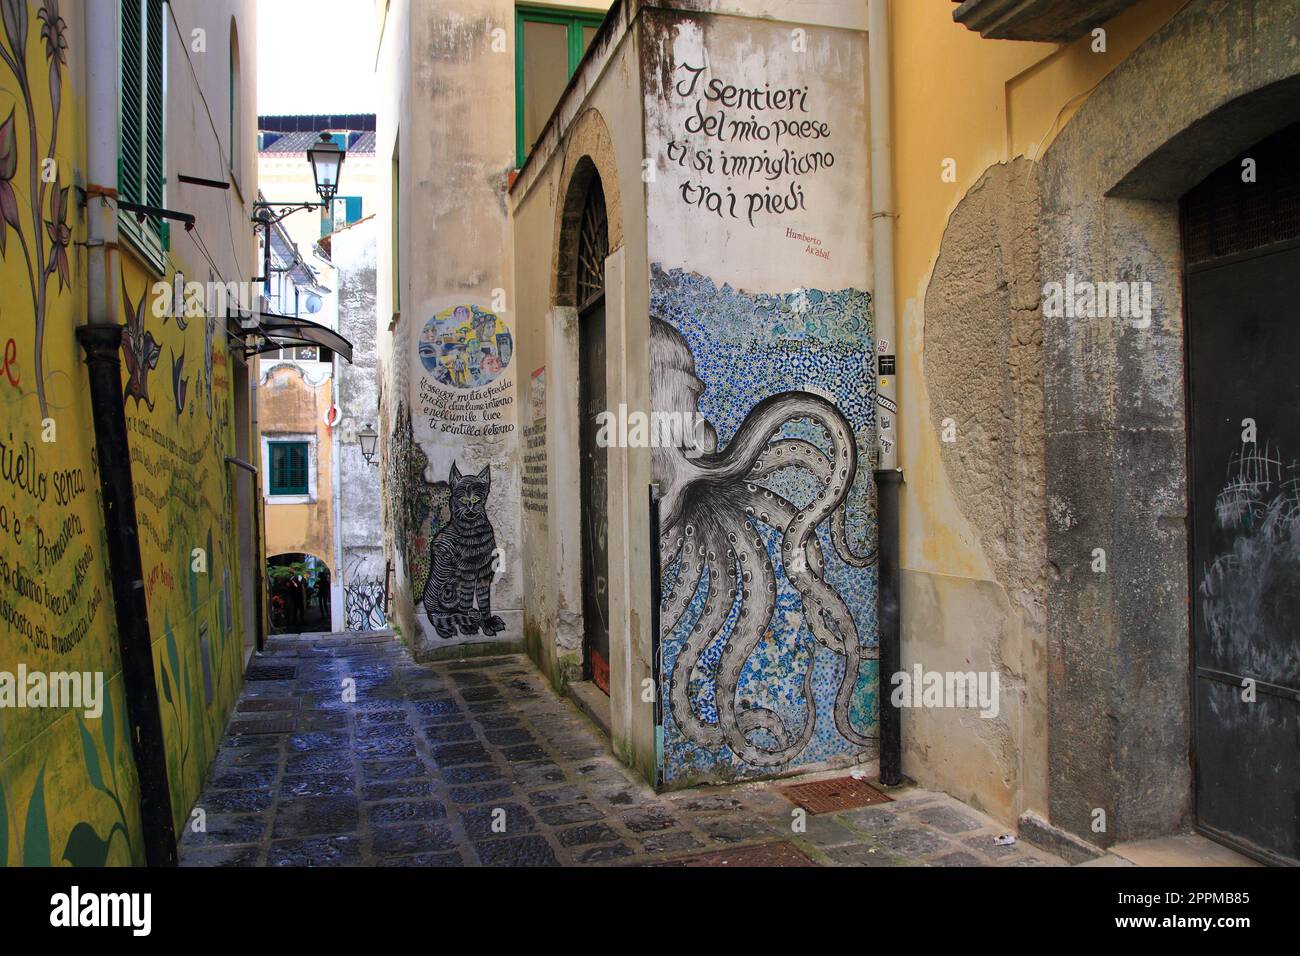 Poetry on the walls of the historic center of Salerno Stock Photo